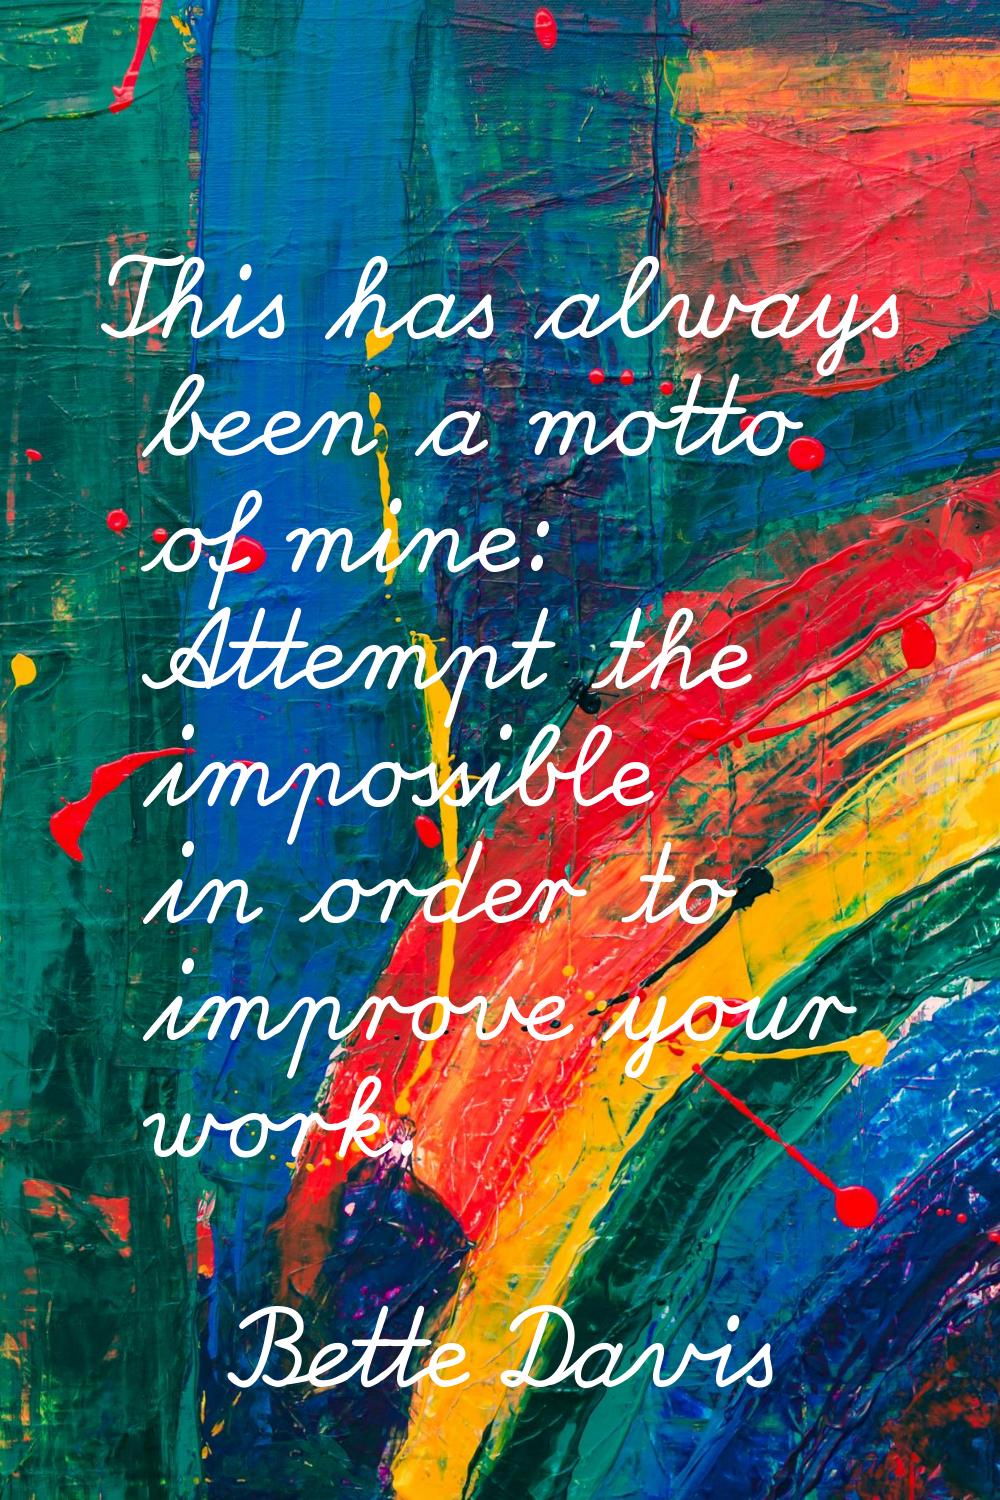 This has always been a motto of mine: Attempt the impossible in order to improve your work.